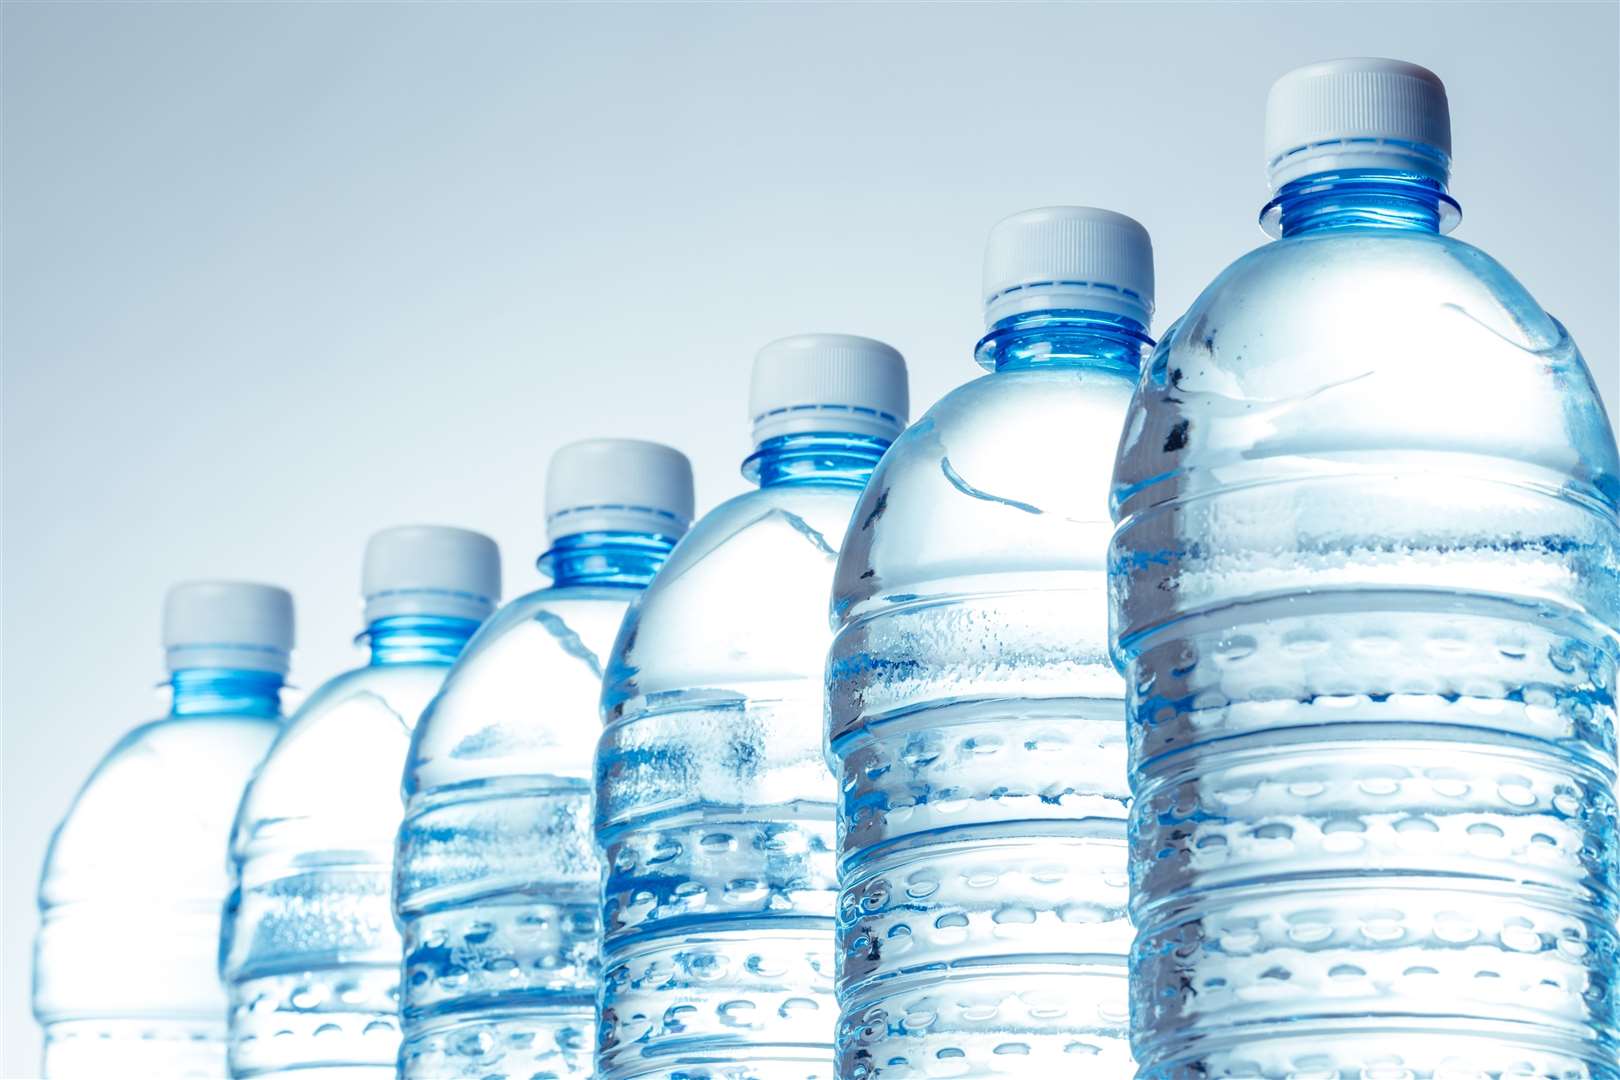 Bottled water could be supplied to people on private water supplies, says Highland Council.